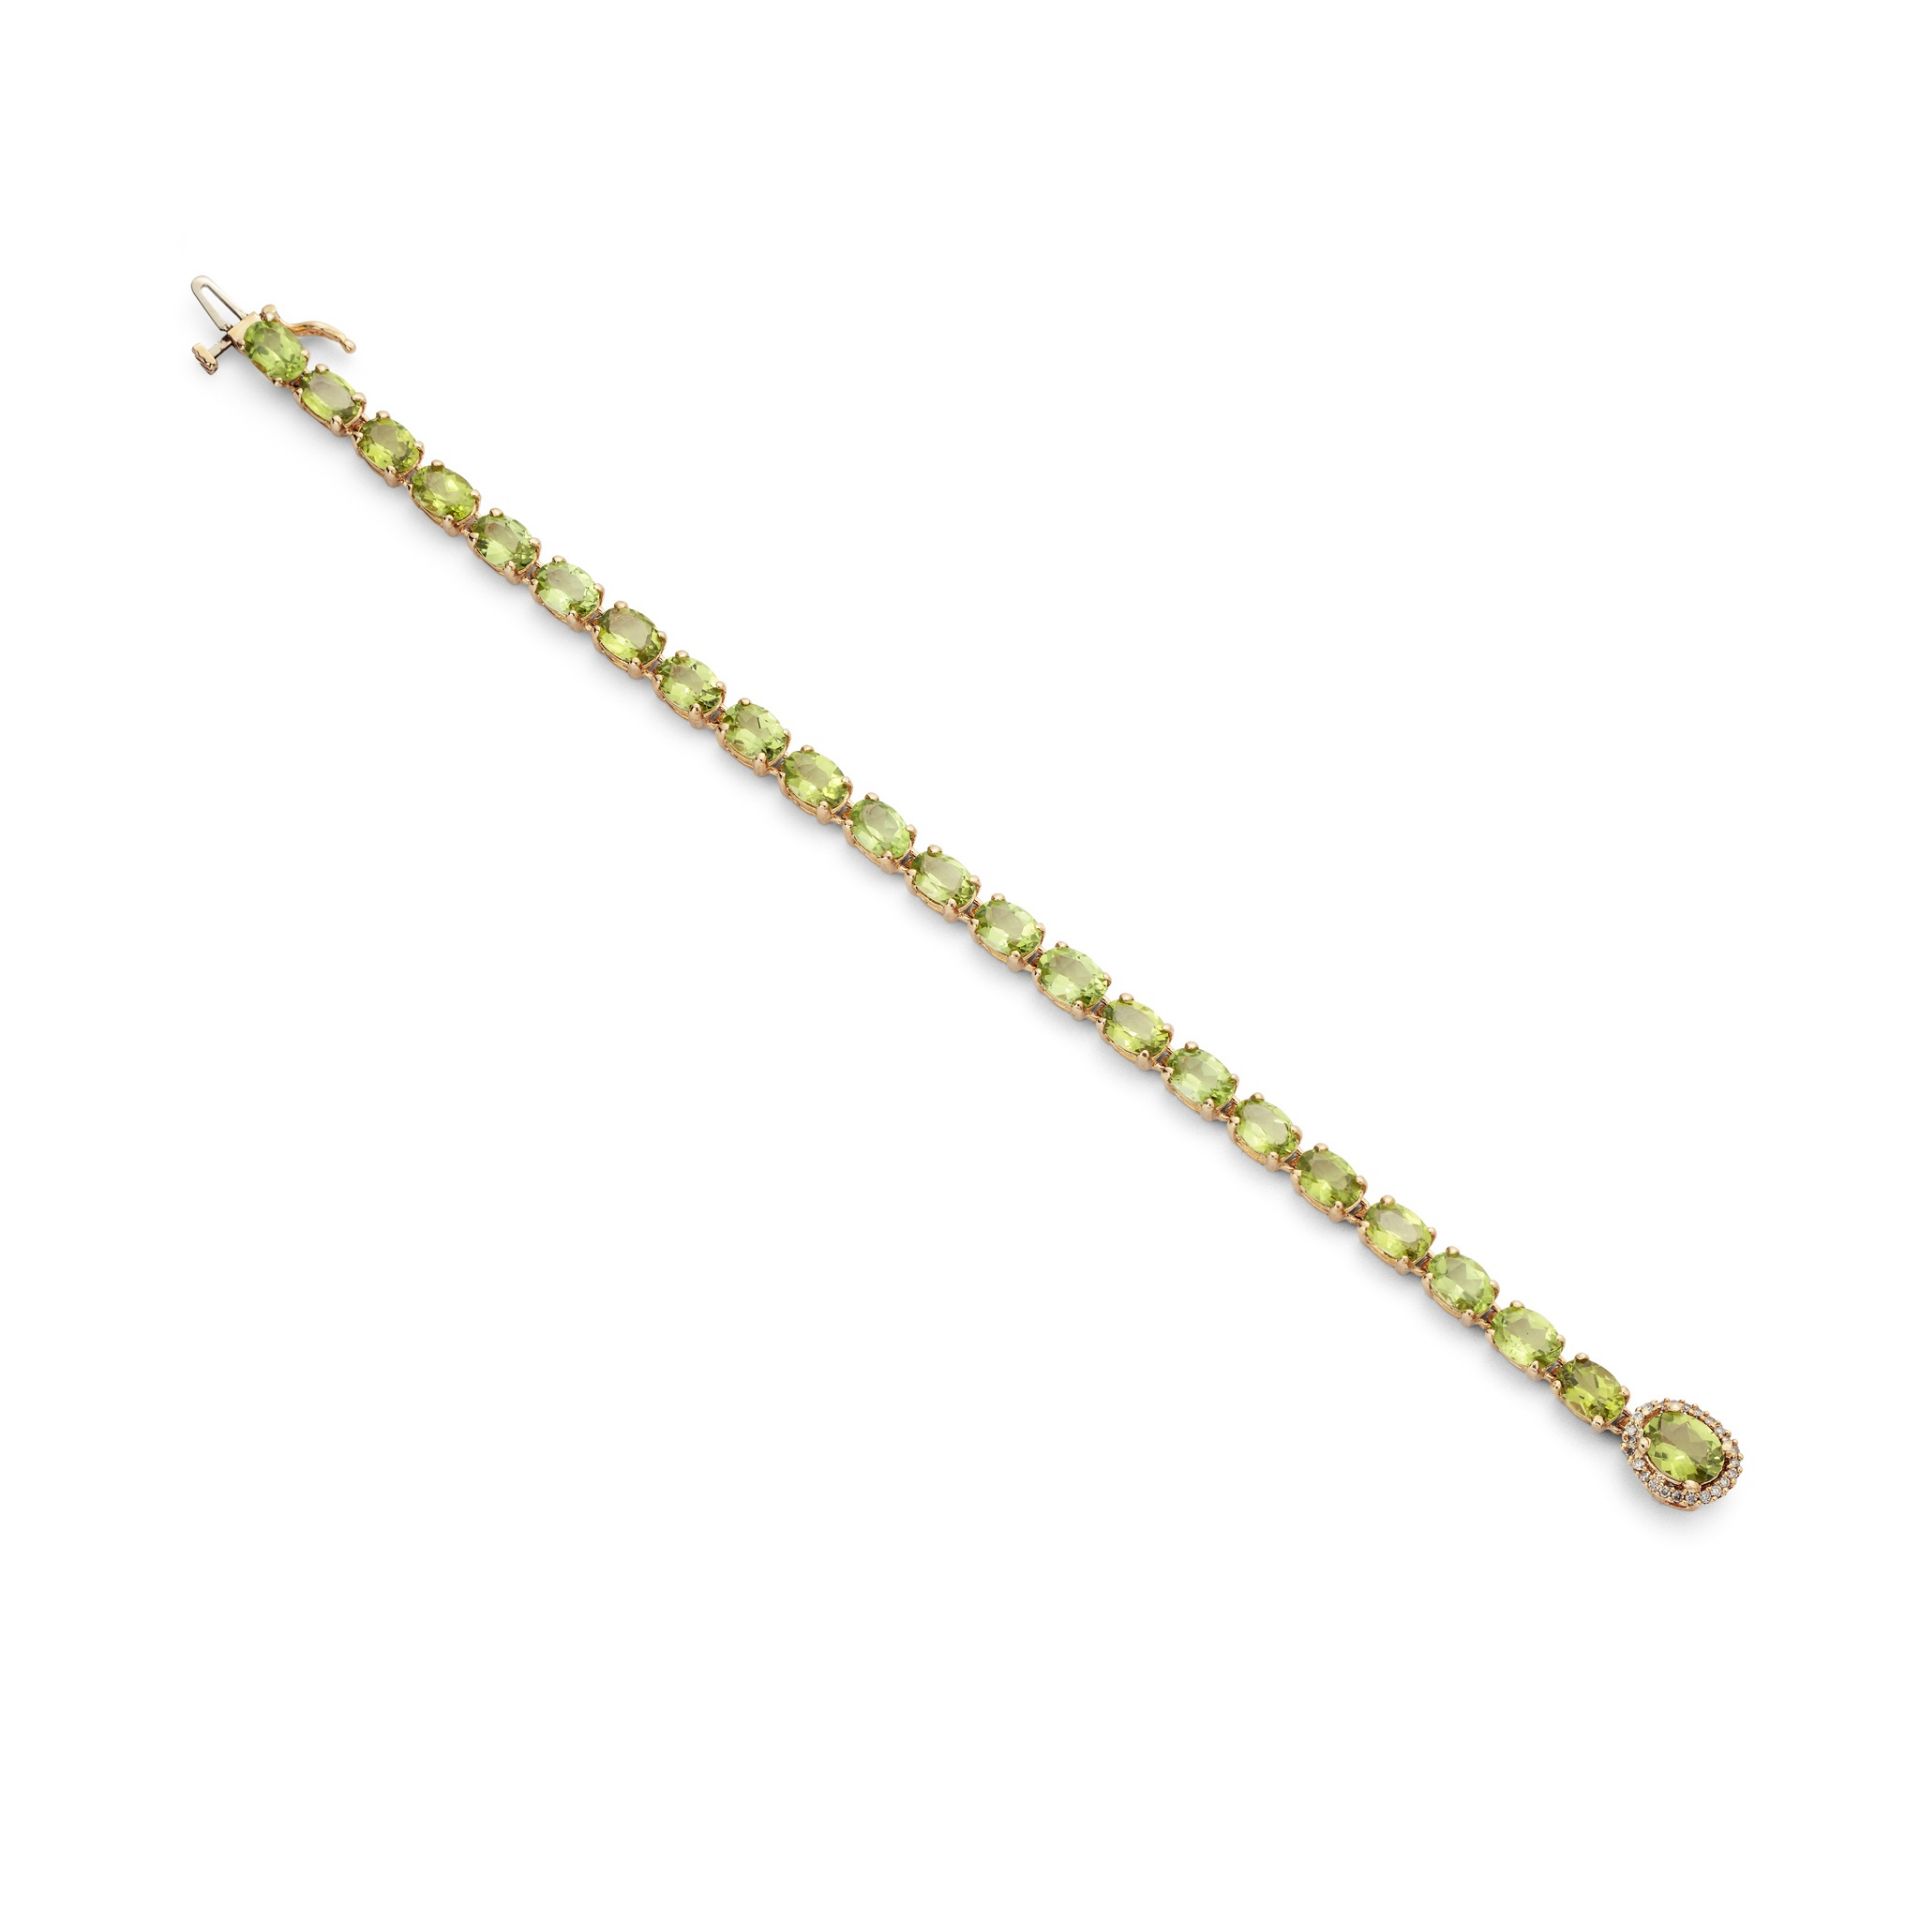 A peridot and diamond bracelet Composed of a continuous row of oval-cut peridot, to a similarly-